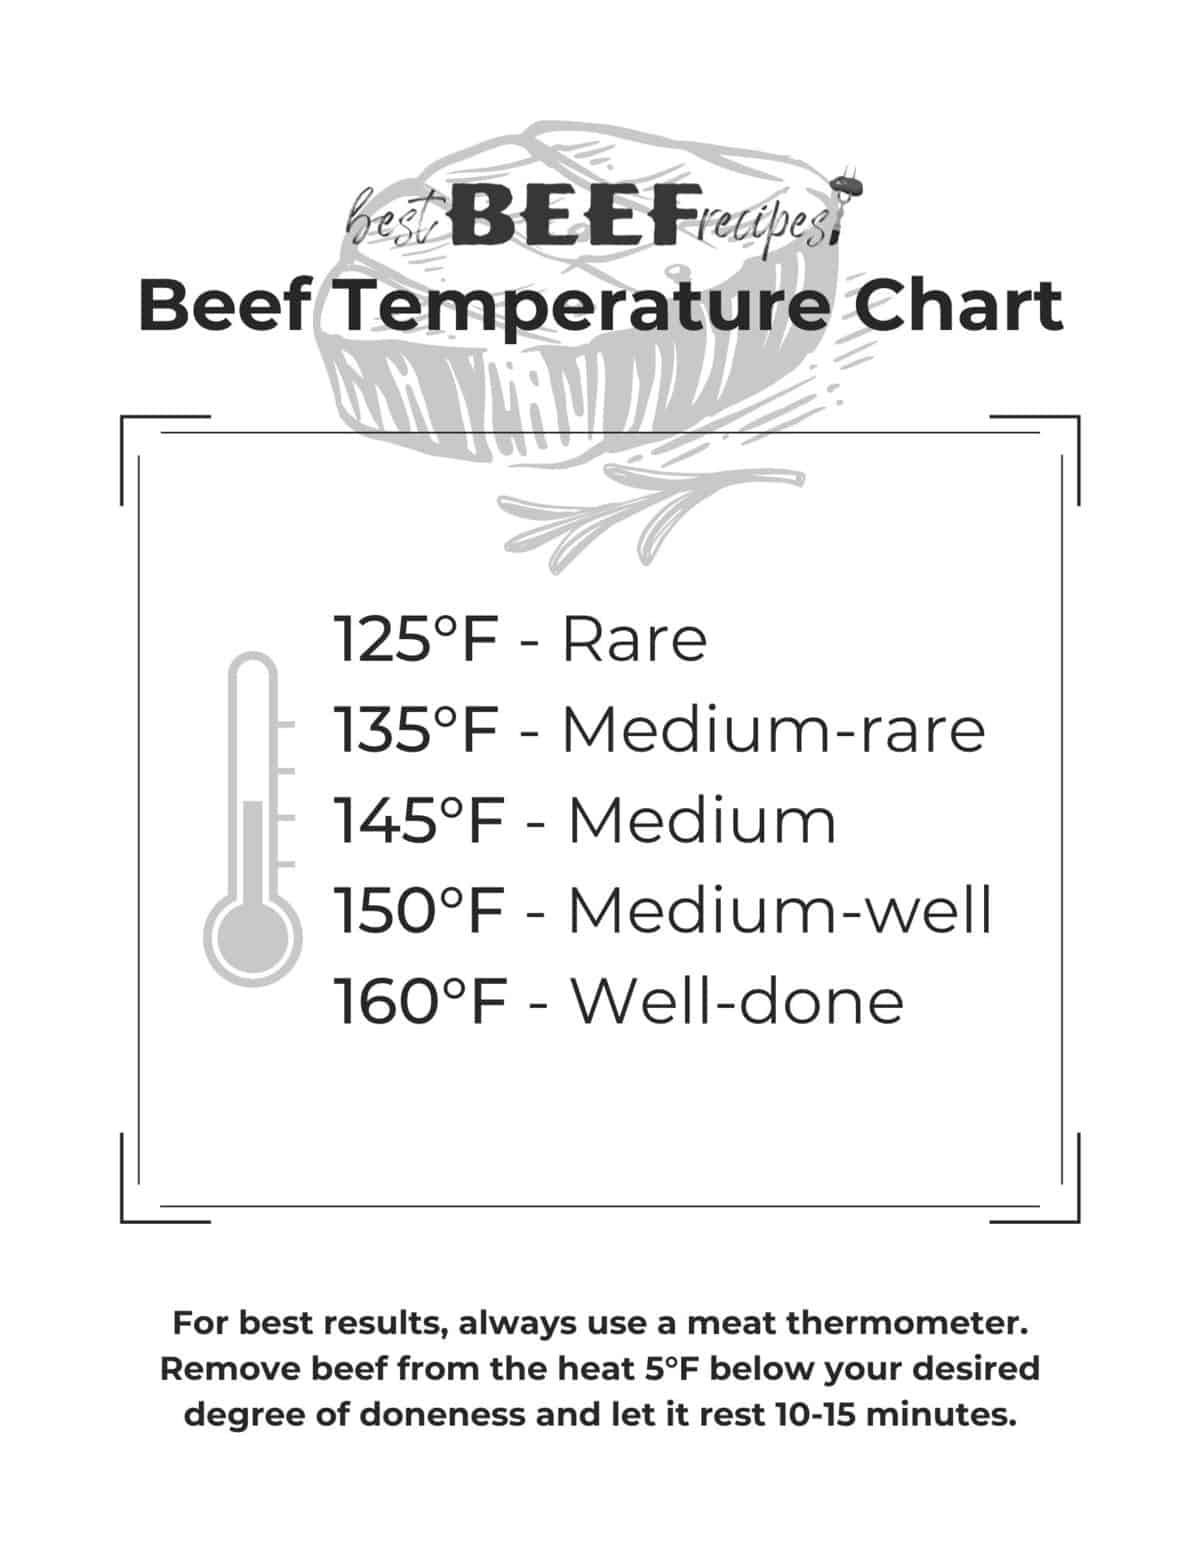 beef temperature chart showing different temperatures for beef